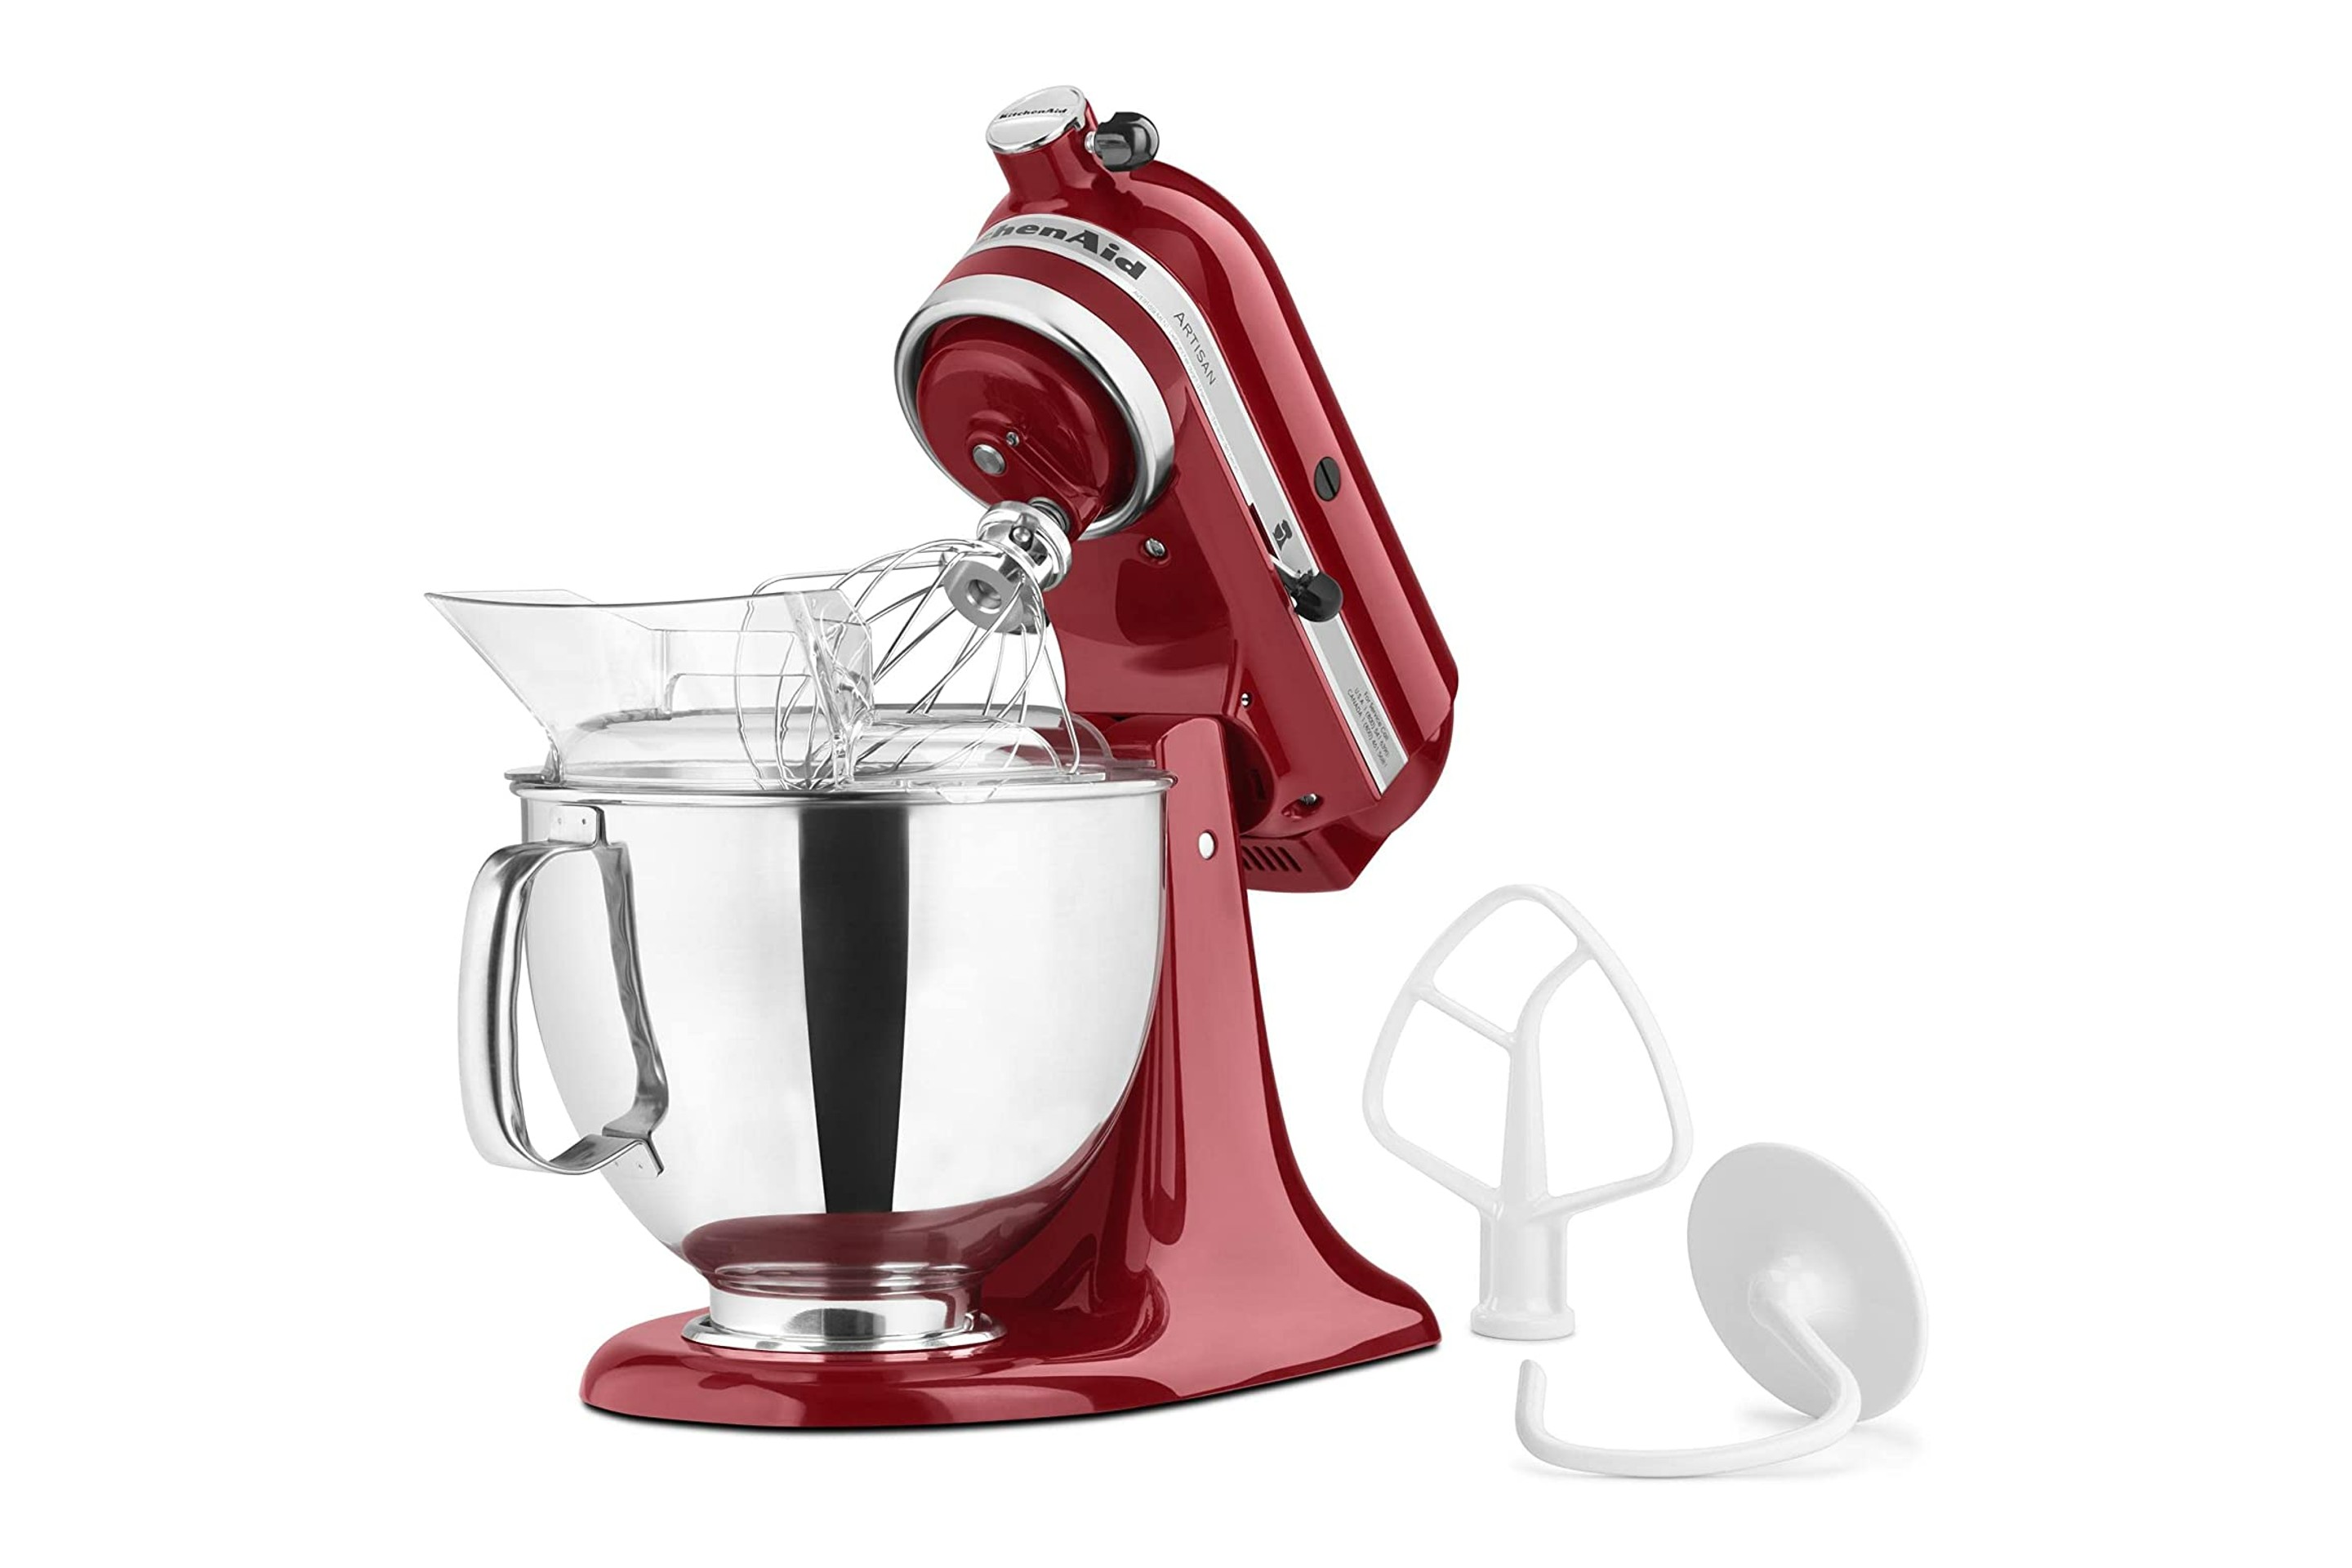 Red KitchenAid KSM150PSER Artisan Tilt-Head Stand Mixer with Splash Guard and Stainless Steel Bowl